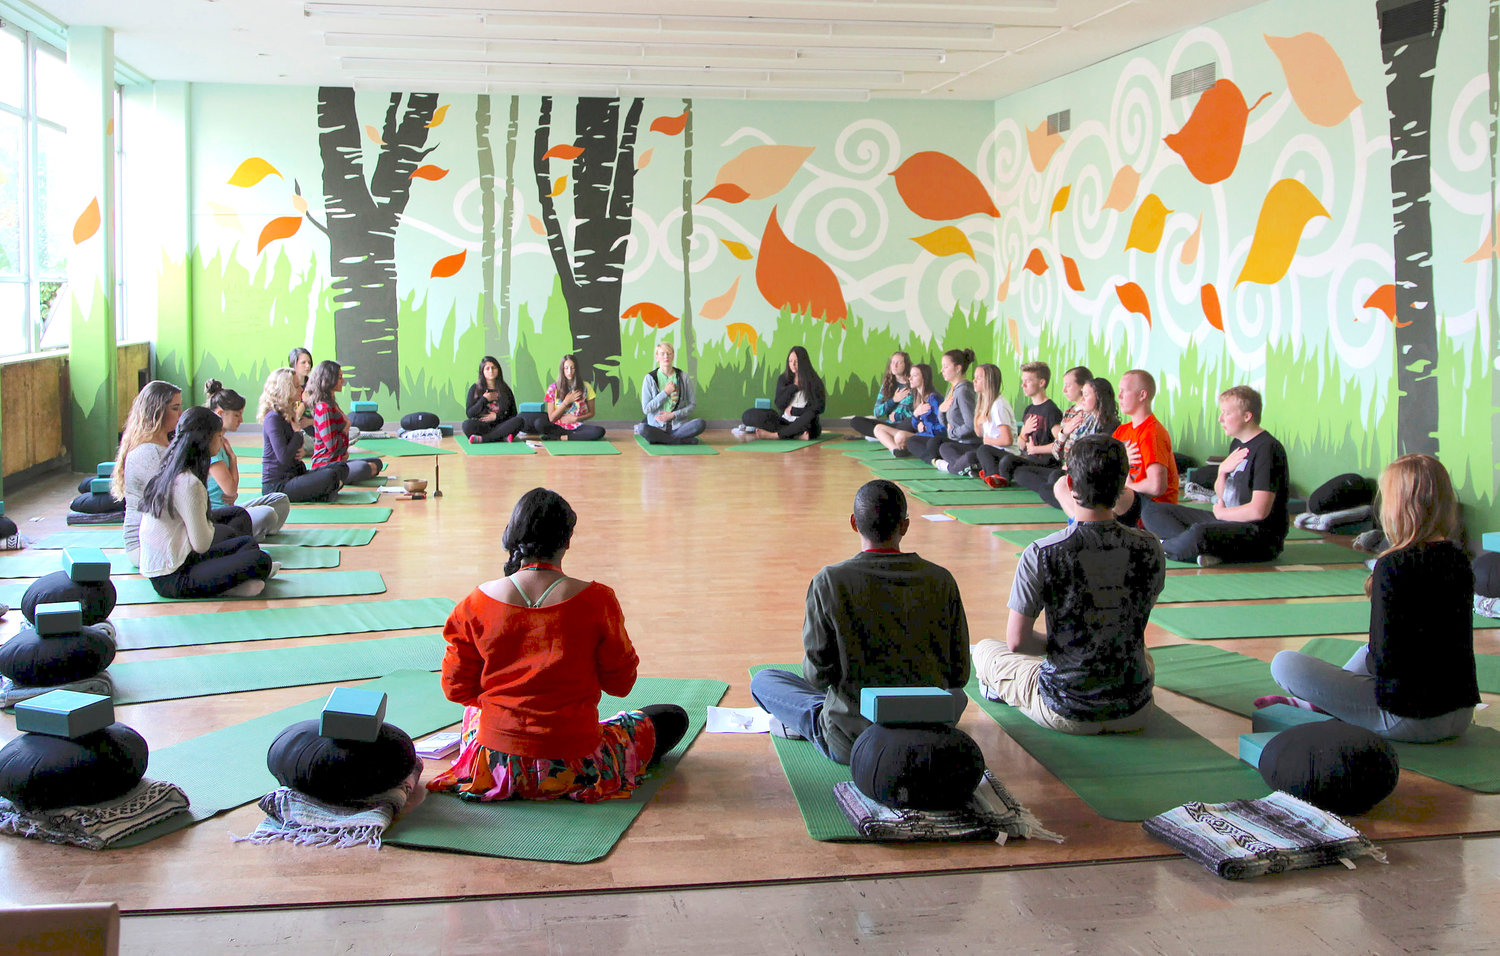 Students meditate during Mindful Studies class at Wilson High School in Portland, Ore., in 2014. According to a study published Wednesday, Nov. 9, 2022 in the journal JAMA Psychiatry, mindfulness meditation worked as well as a standard drug for treating anxiety in the first head-to-head comparison.